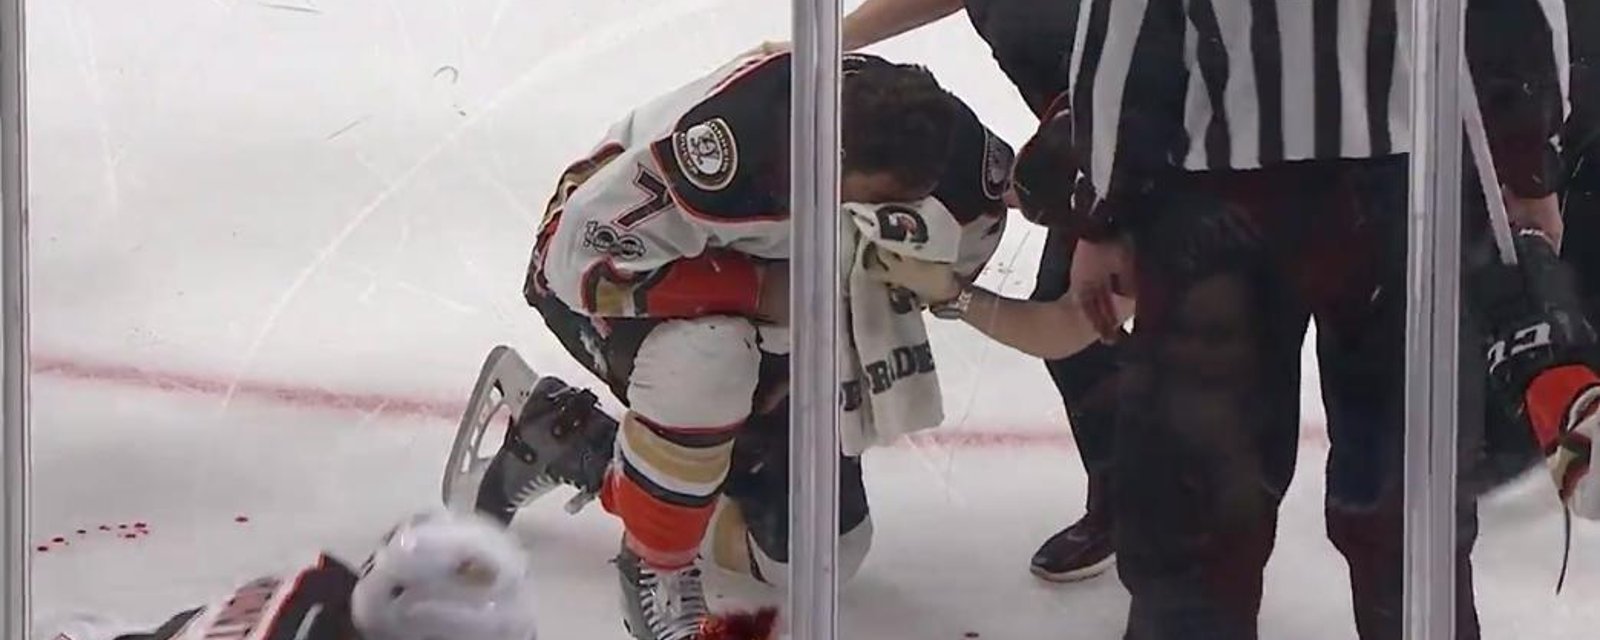 Cogliano bleeds all over the place after NASTY hit. 